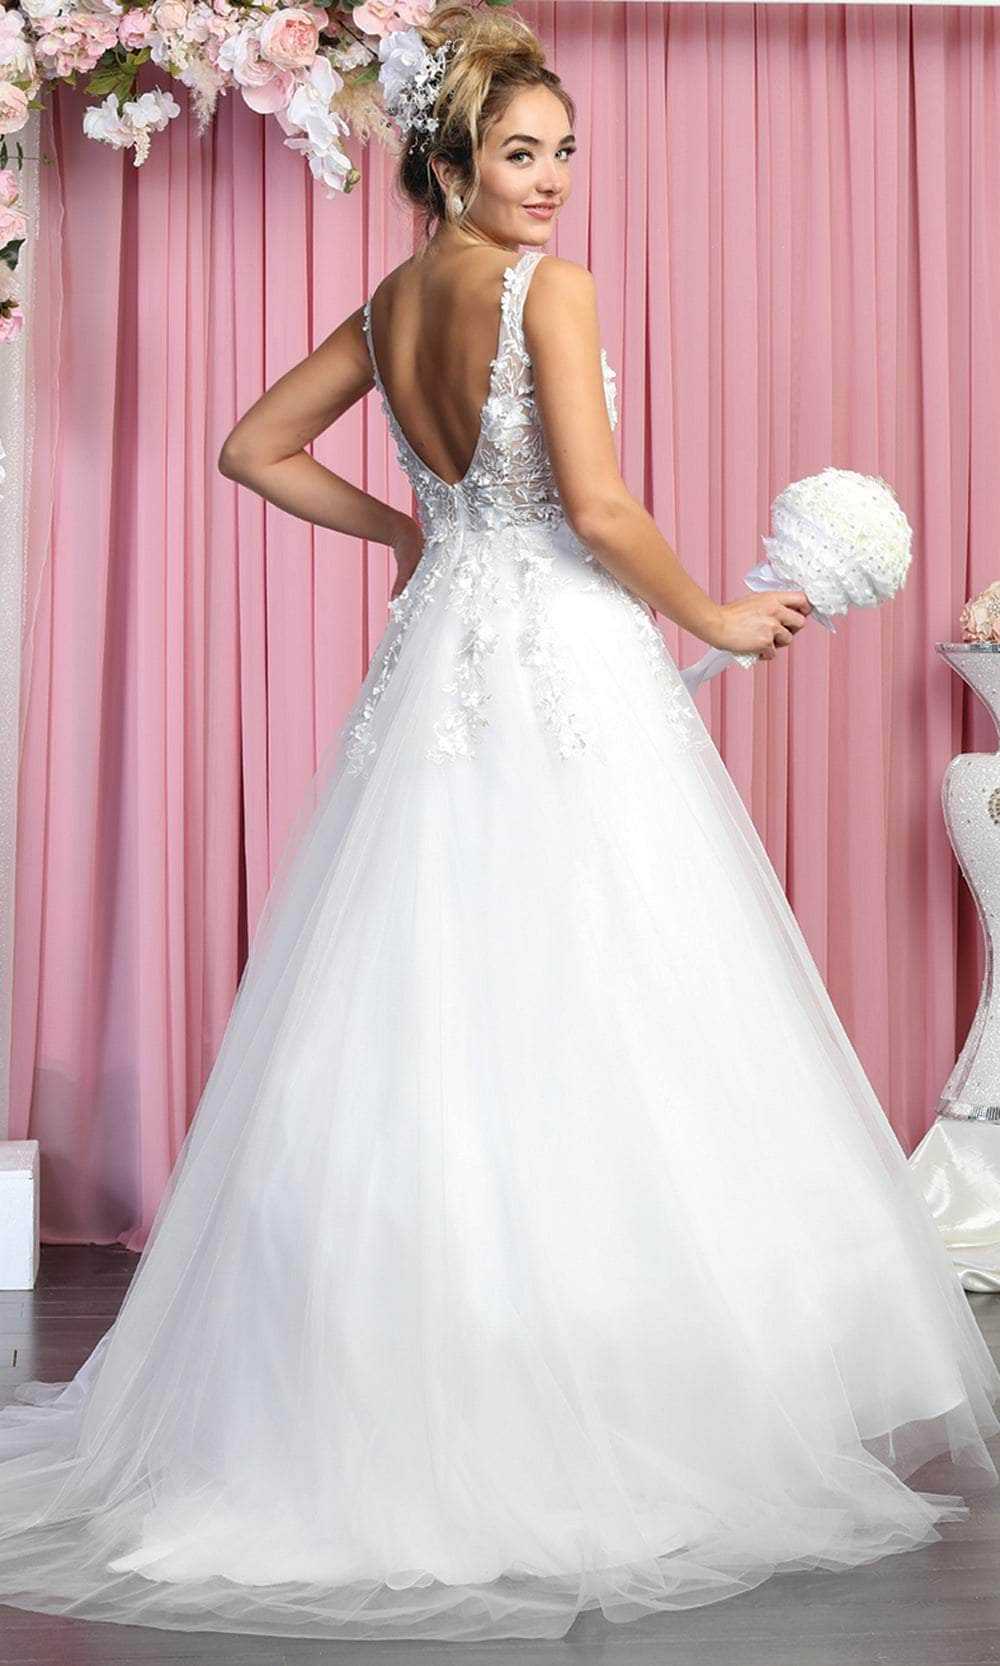 May Queen, May Queen RQ7902 - Sleeveless Plunging V-Neckline Wedding Gown